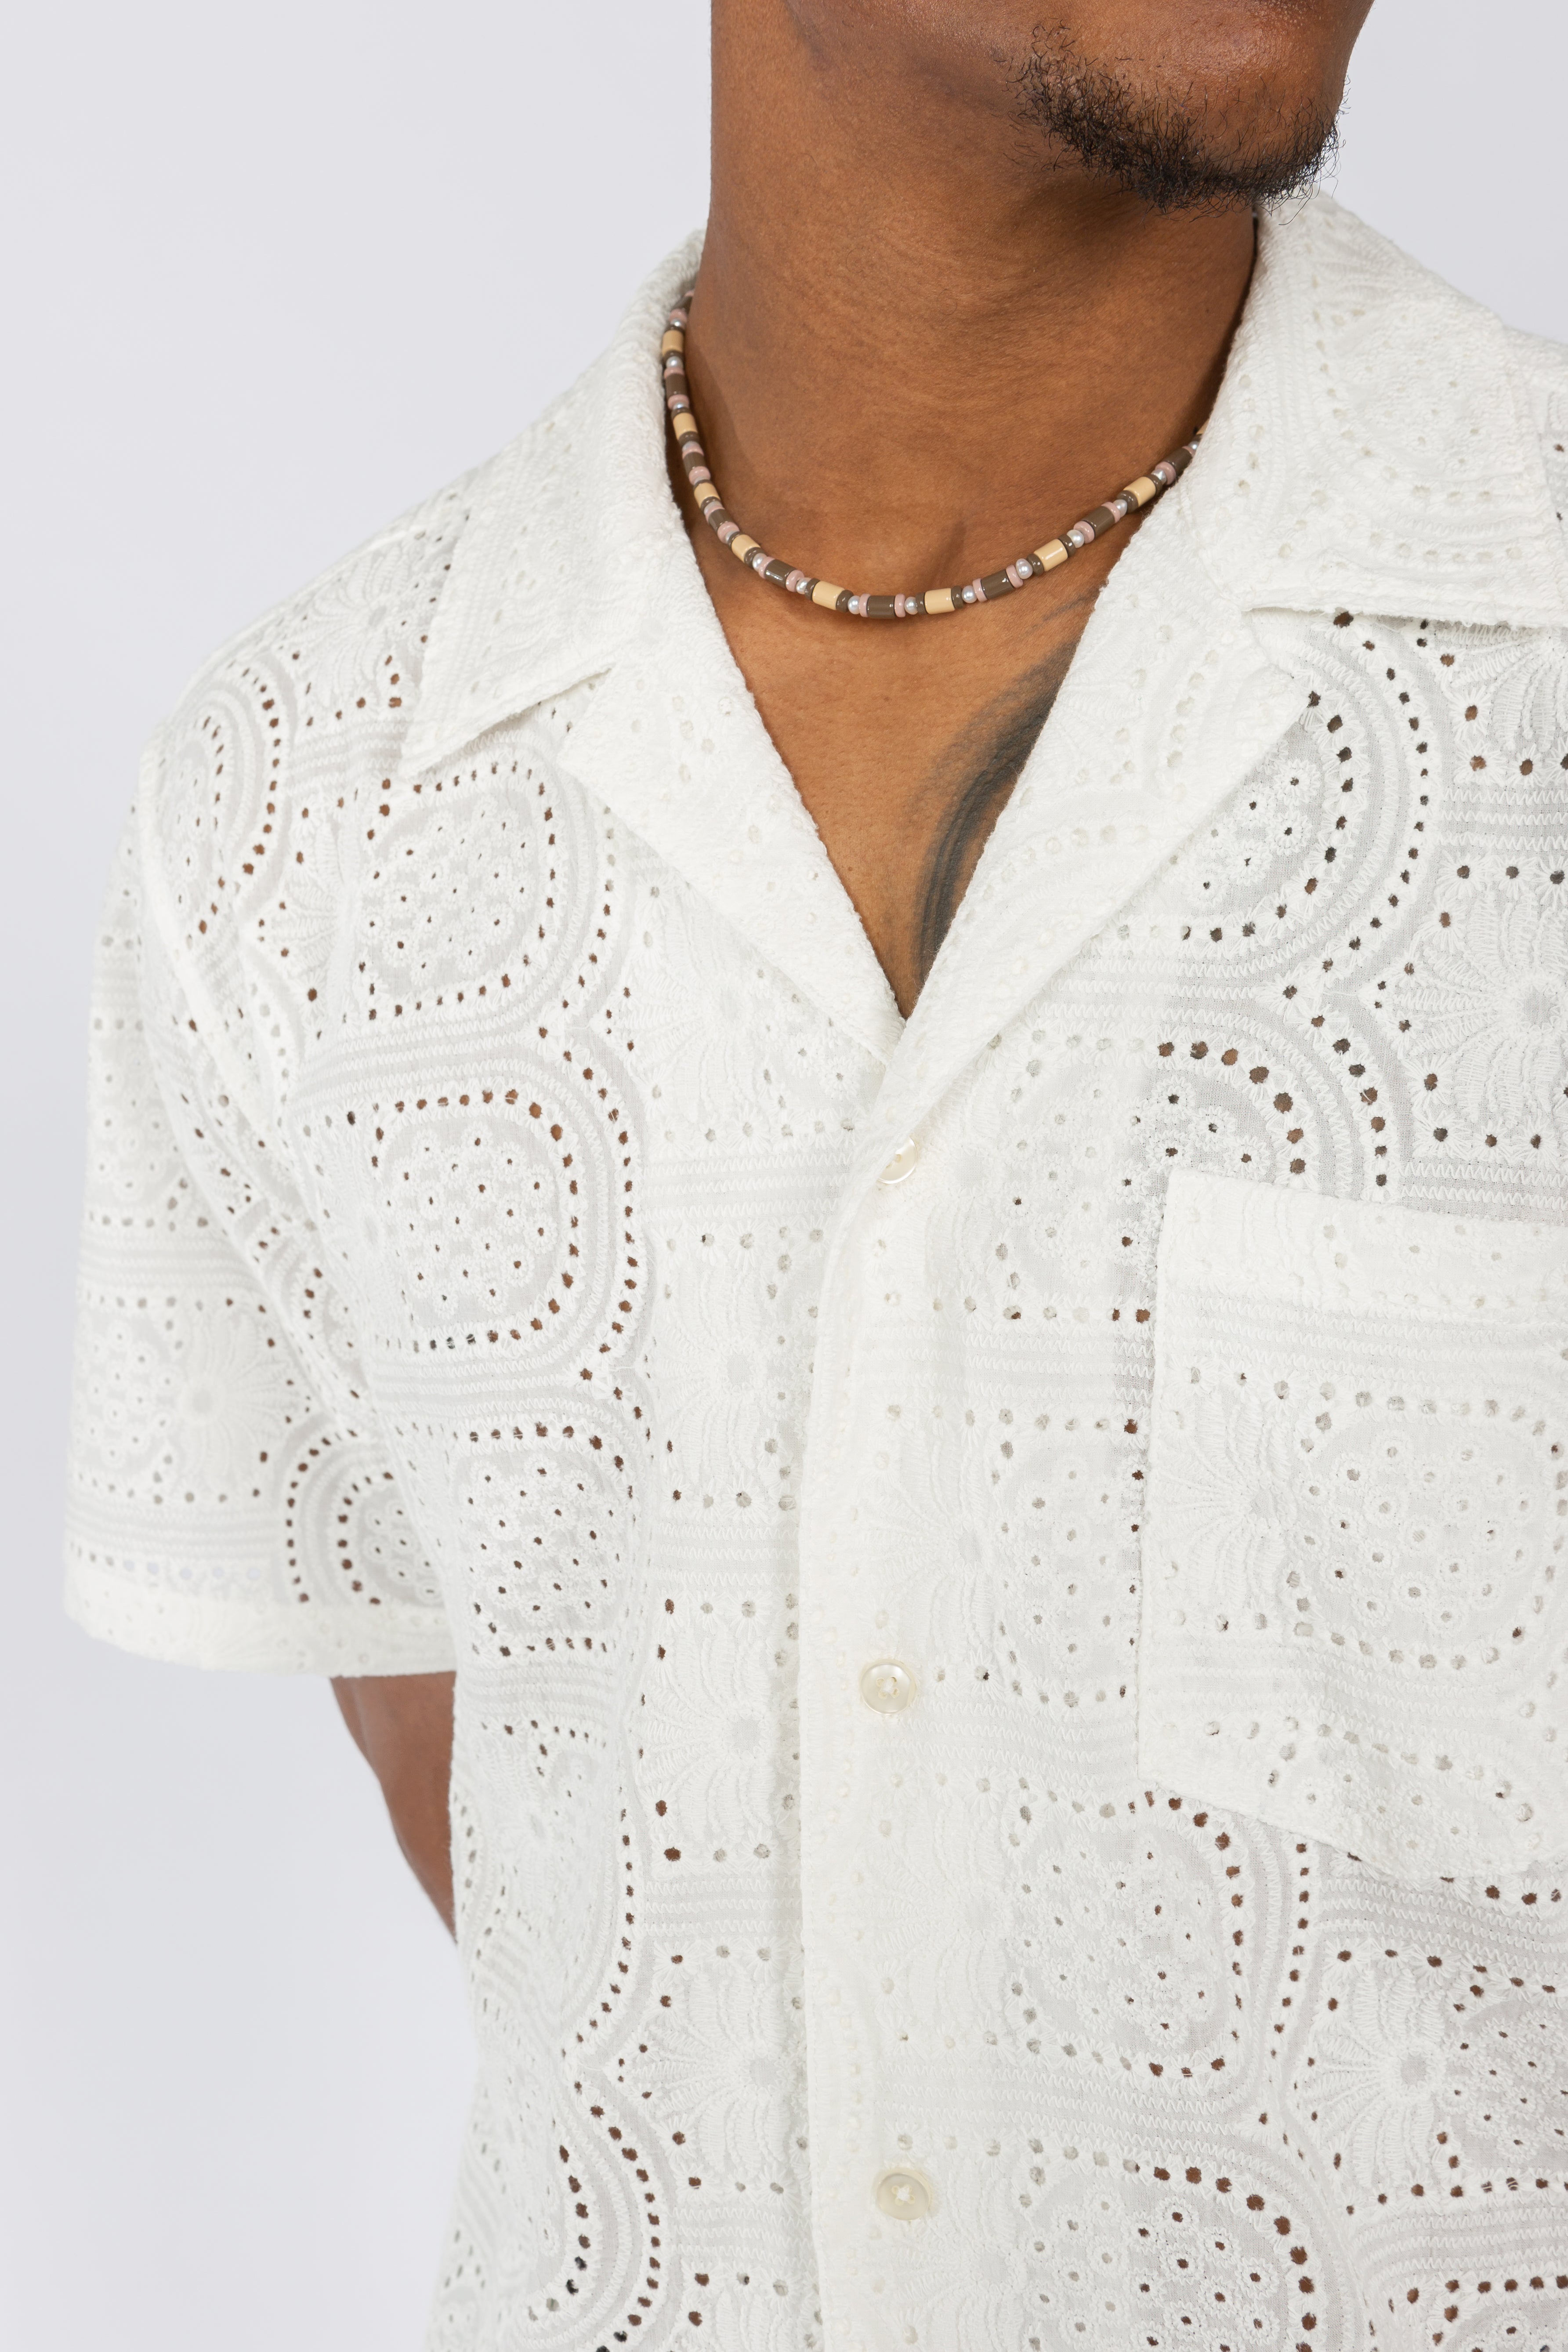 Short Sleeve Convertible Collar Shirt - White Midmod Embroidery – SHADES OF  GREY BY MICAH COHEN